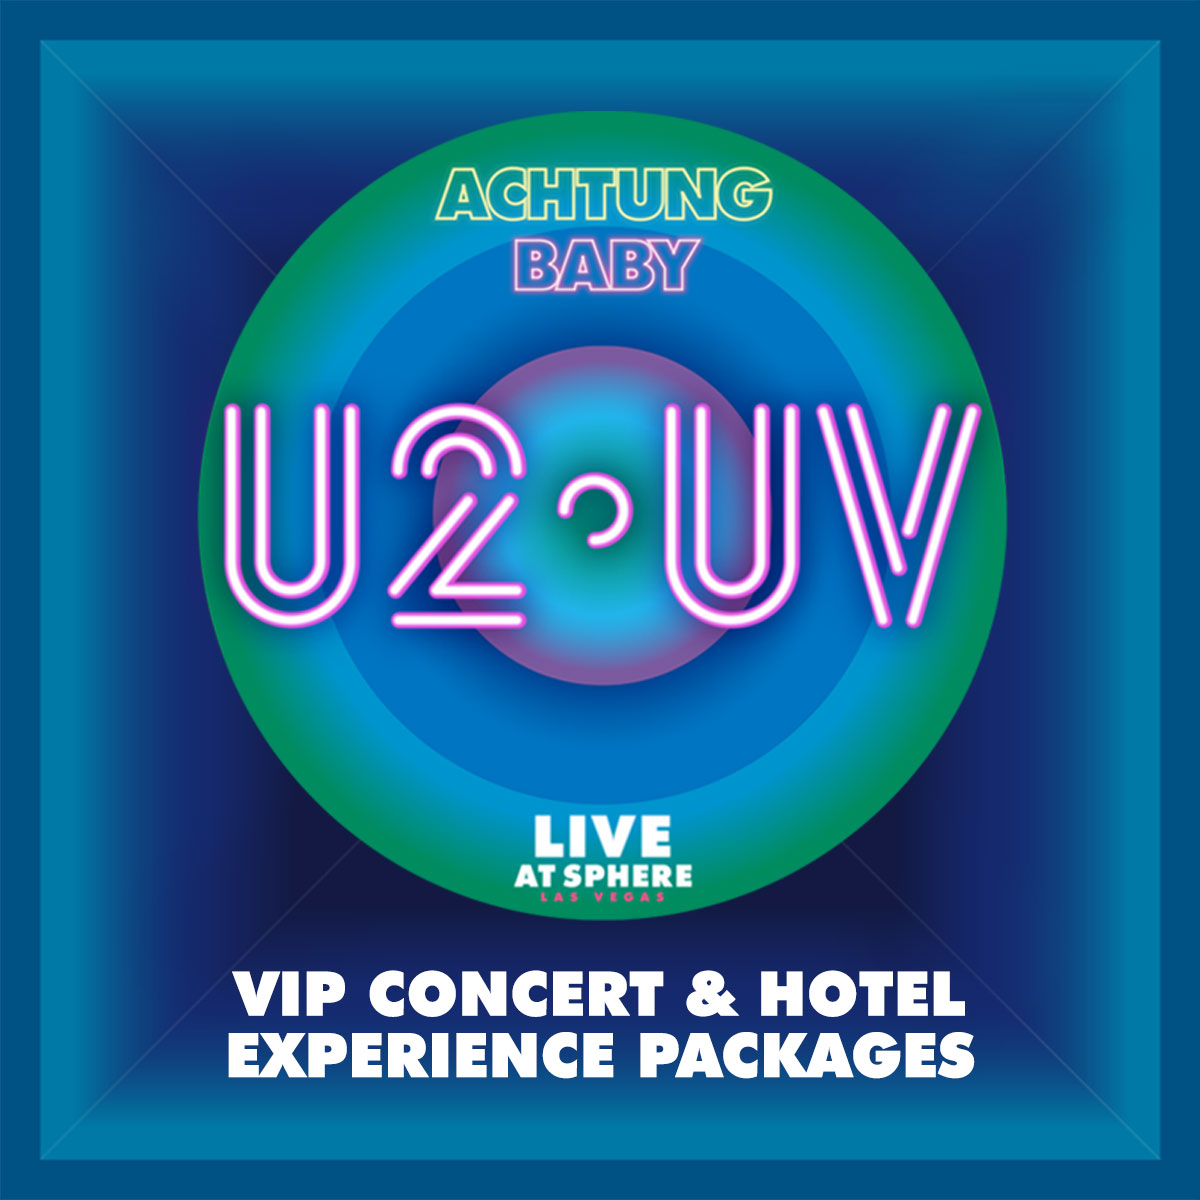 Banner for U2:UV: VIP Concert & Hotel Experience Packages